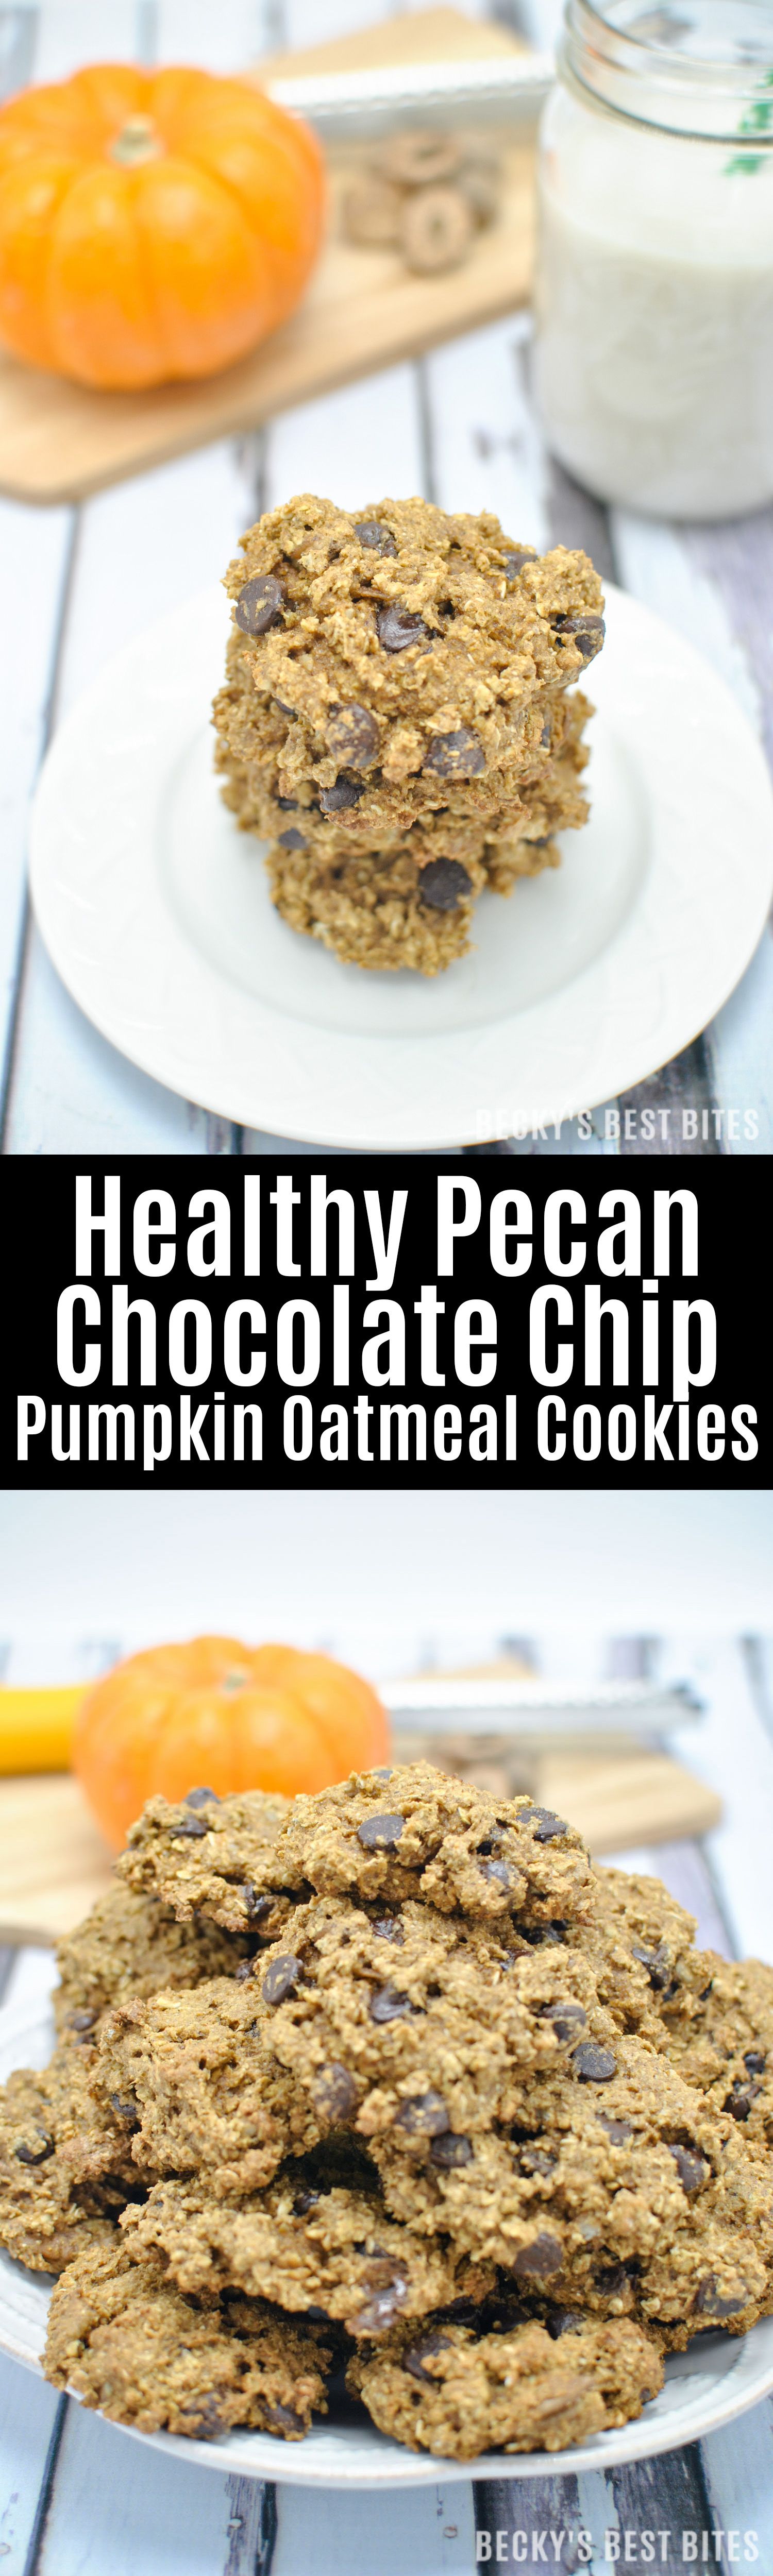 Healthy Pecan Chocolate Chip Pumpkin Oatmeal Cookies are a fall treat with no guilt! They include no b